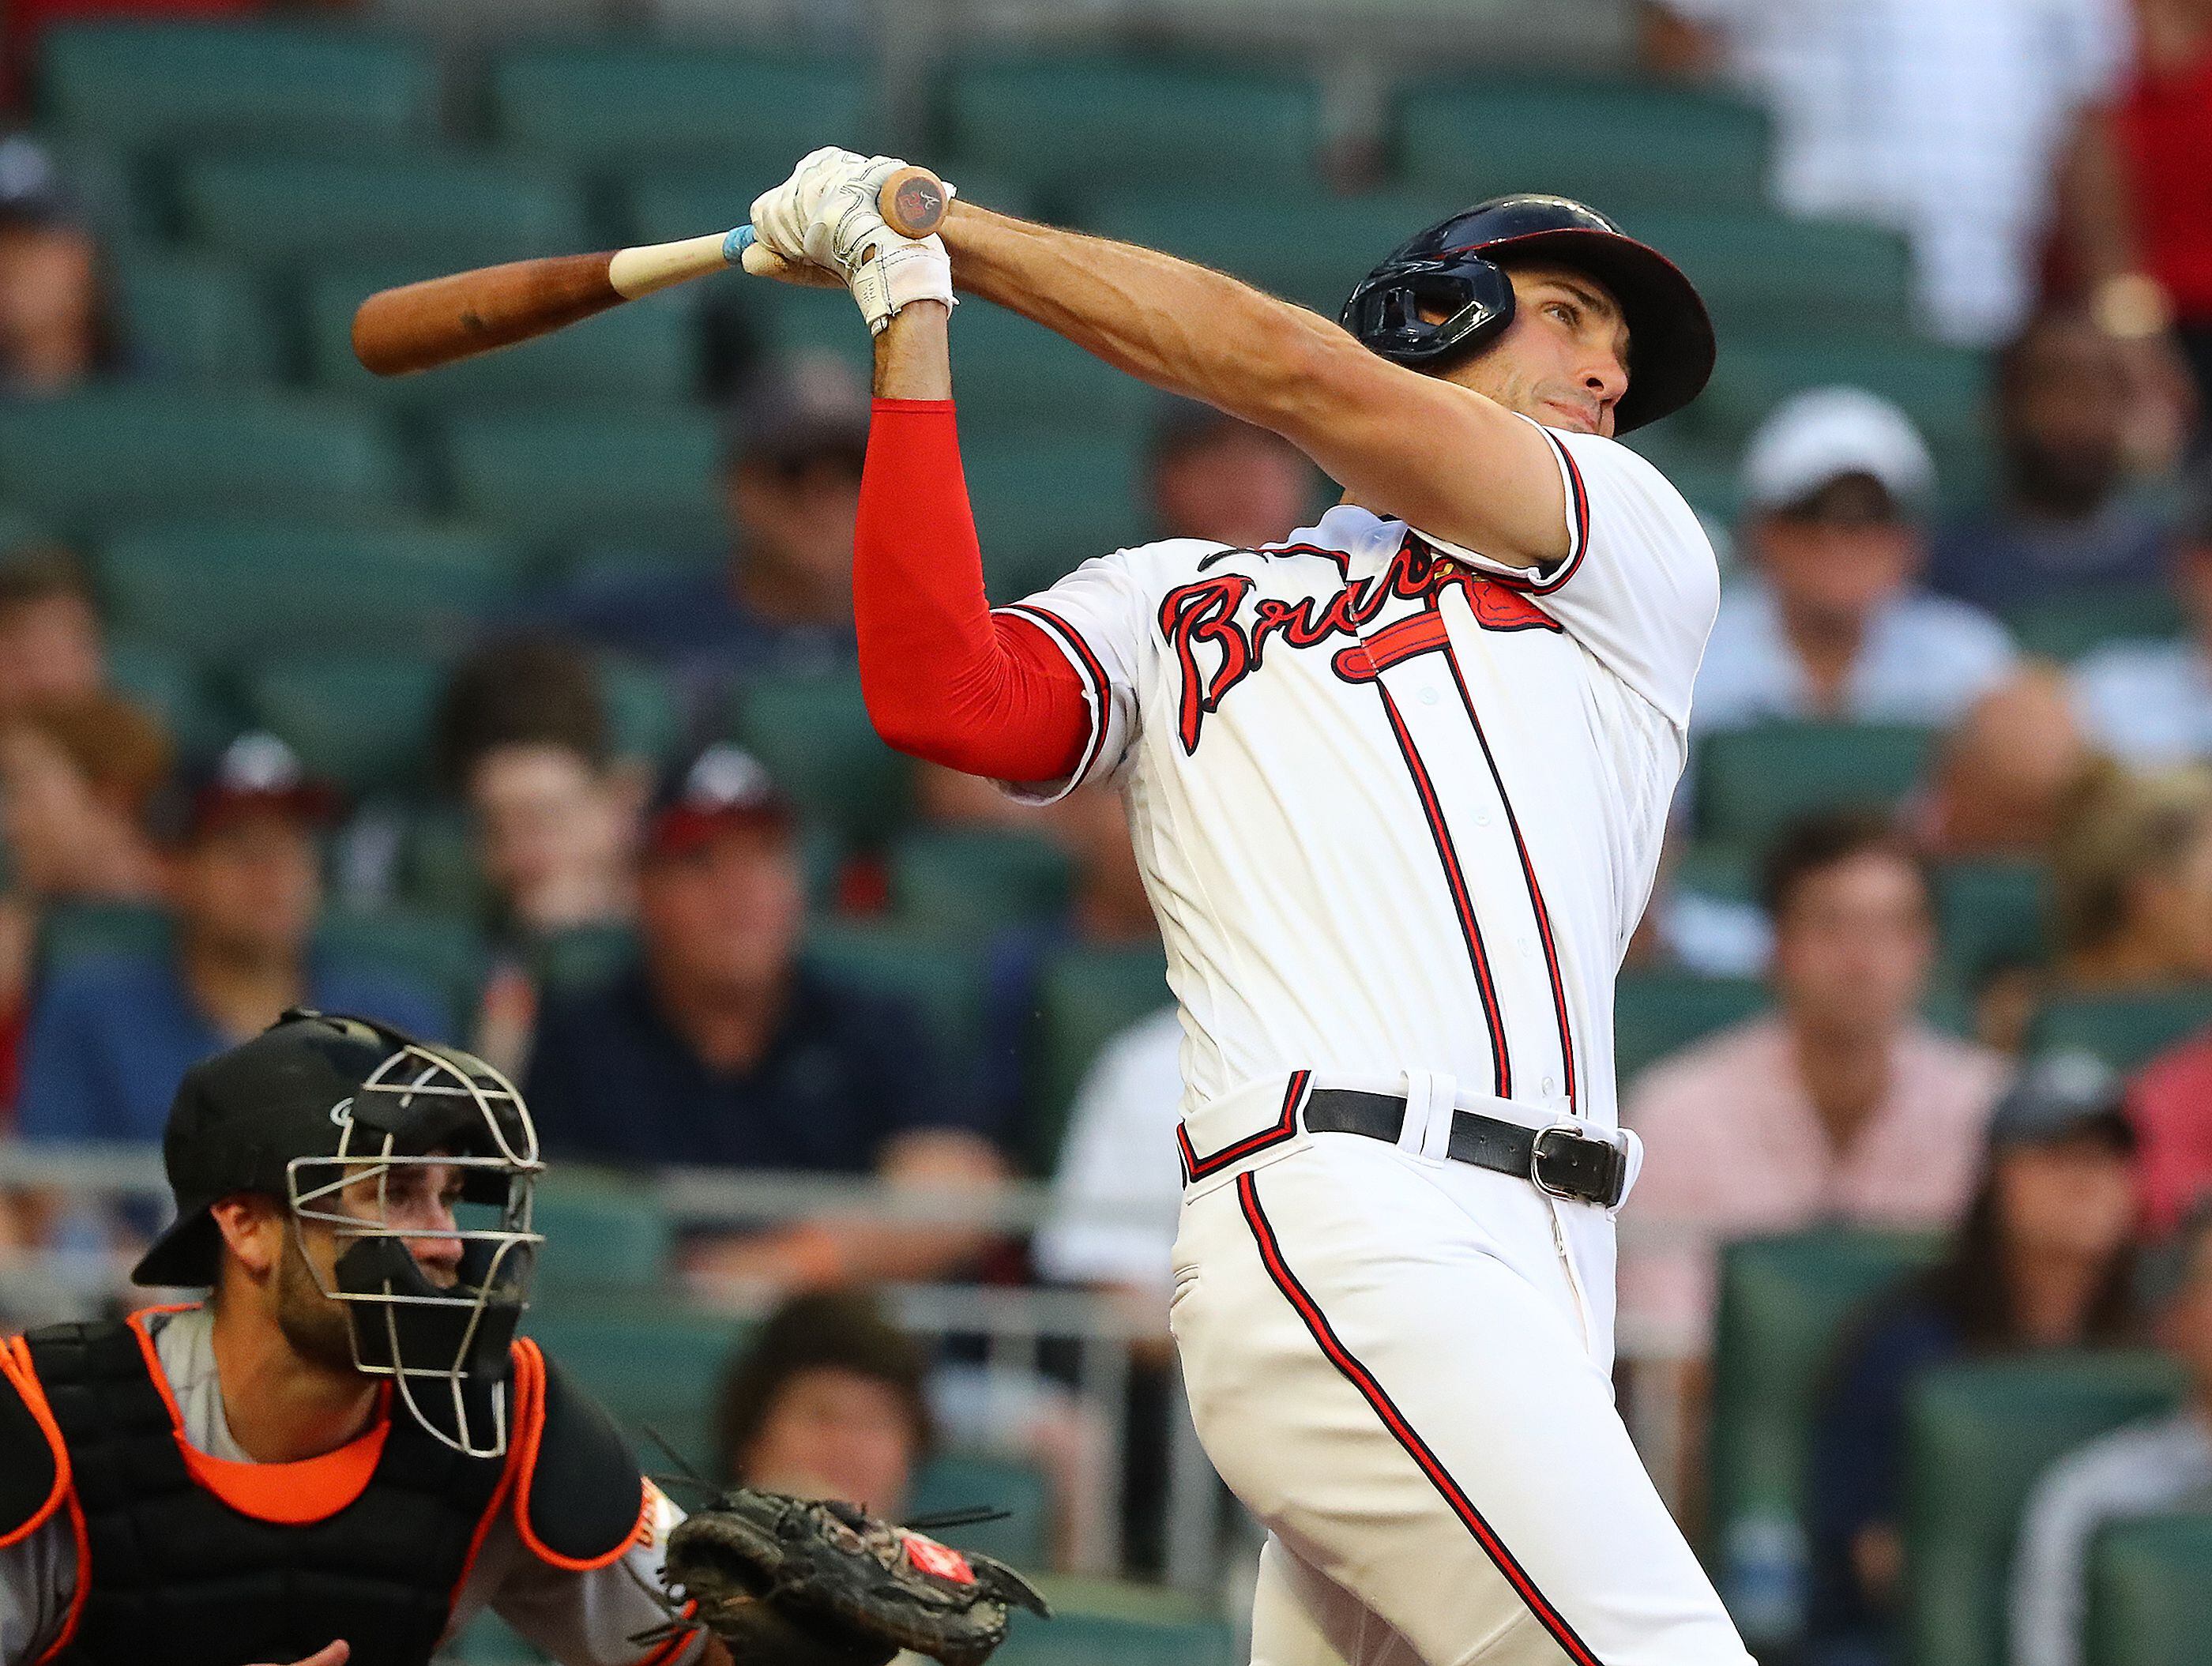 Photos: Pitching fails Braves in loss to Giants